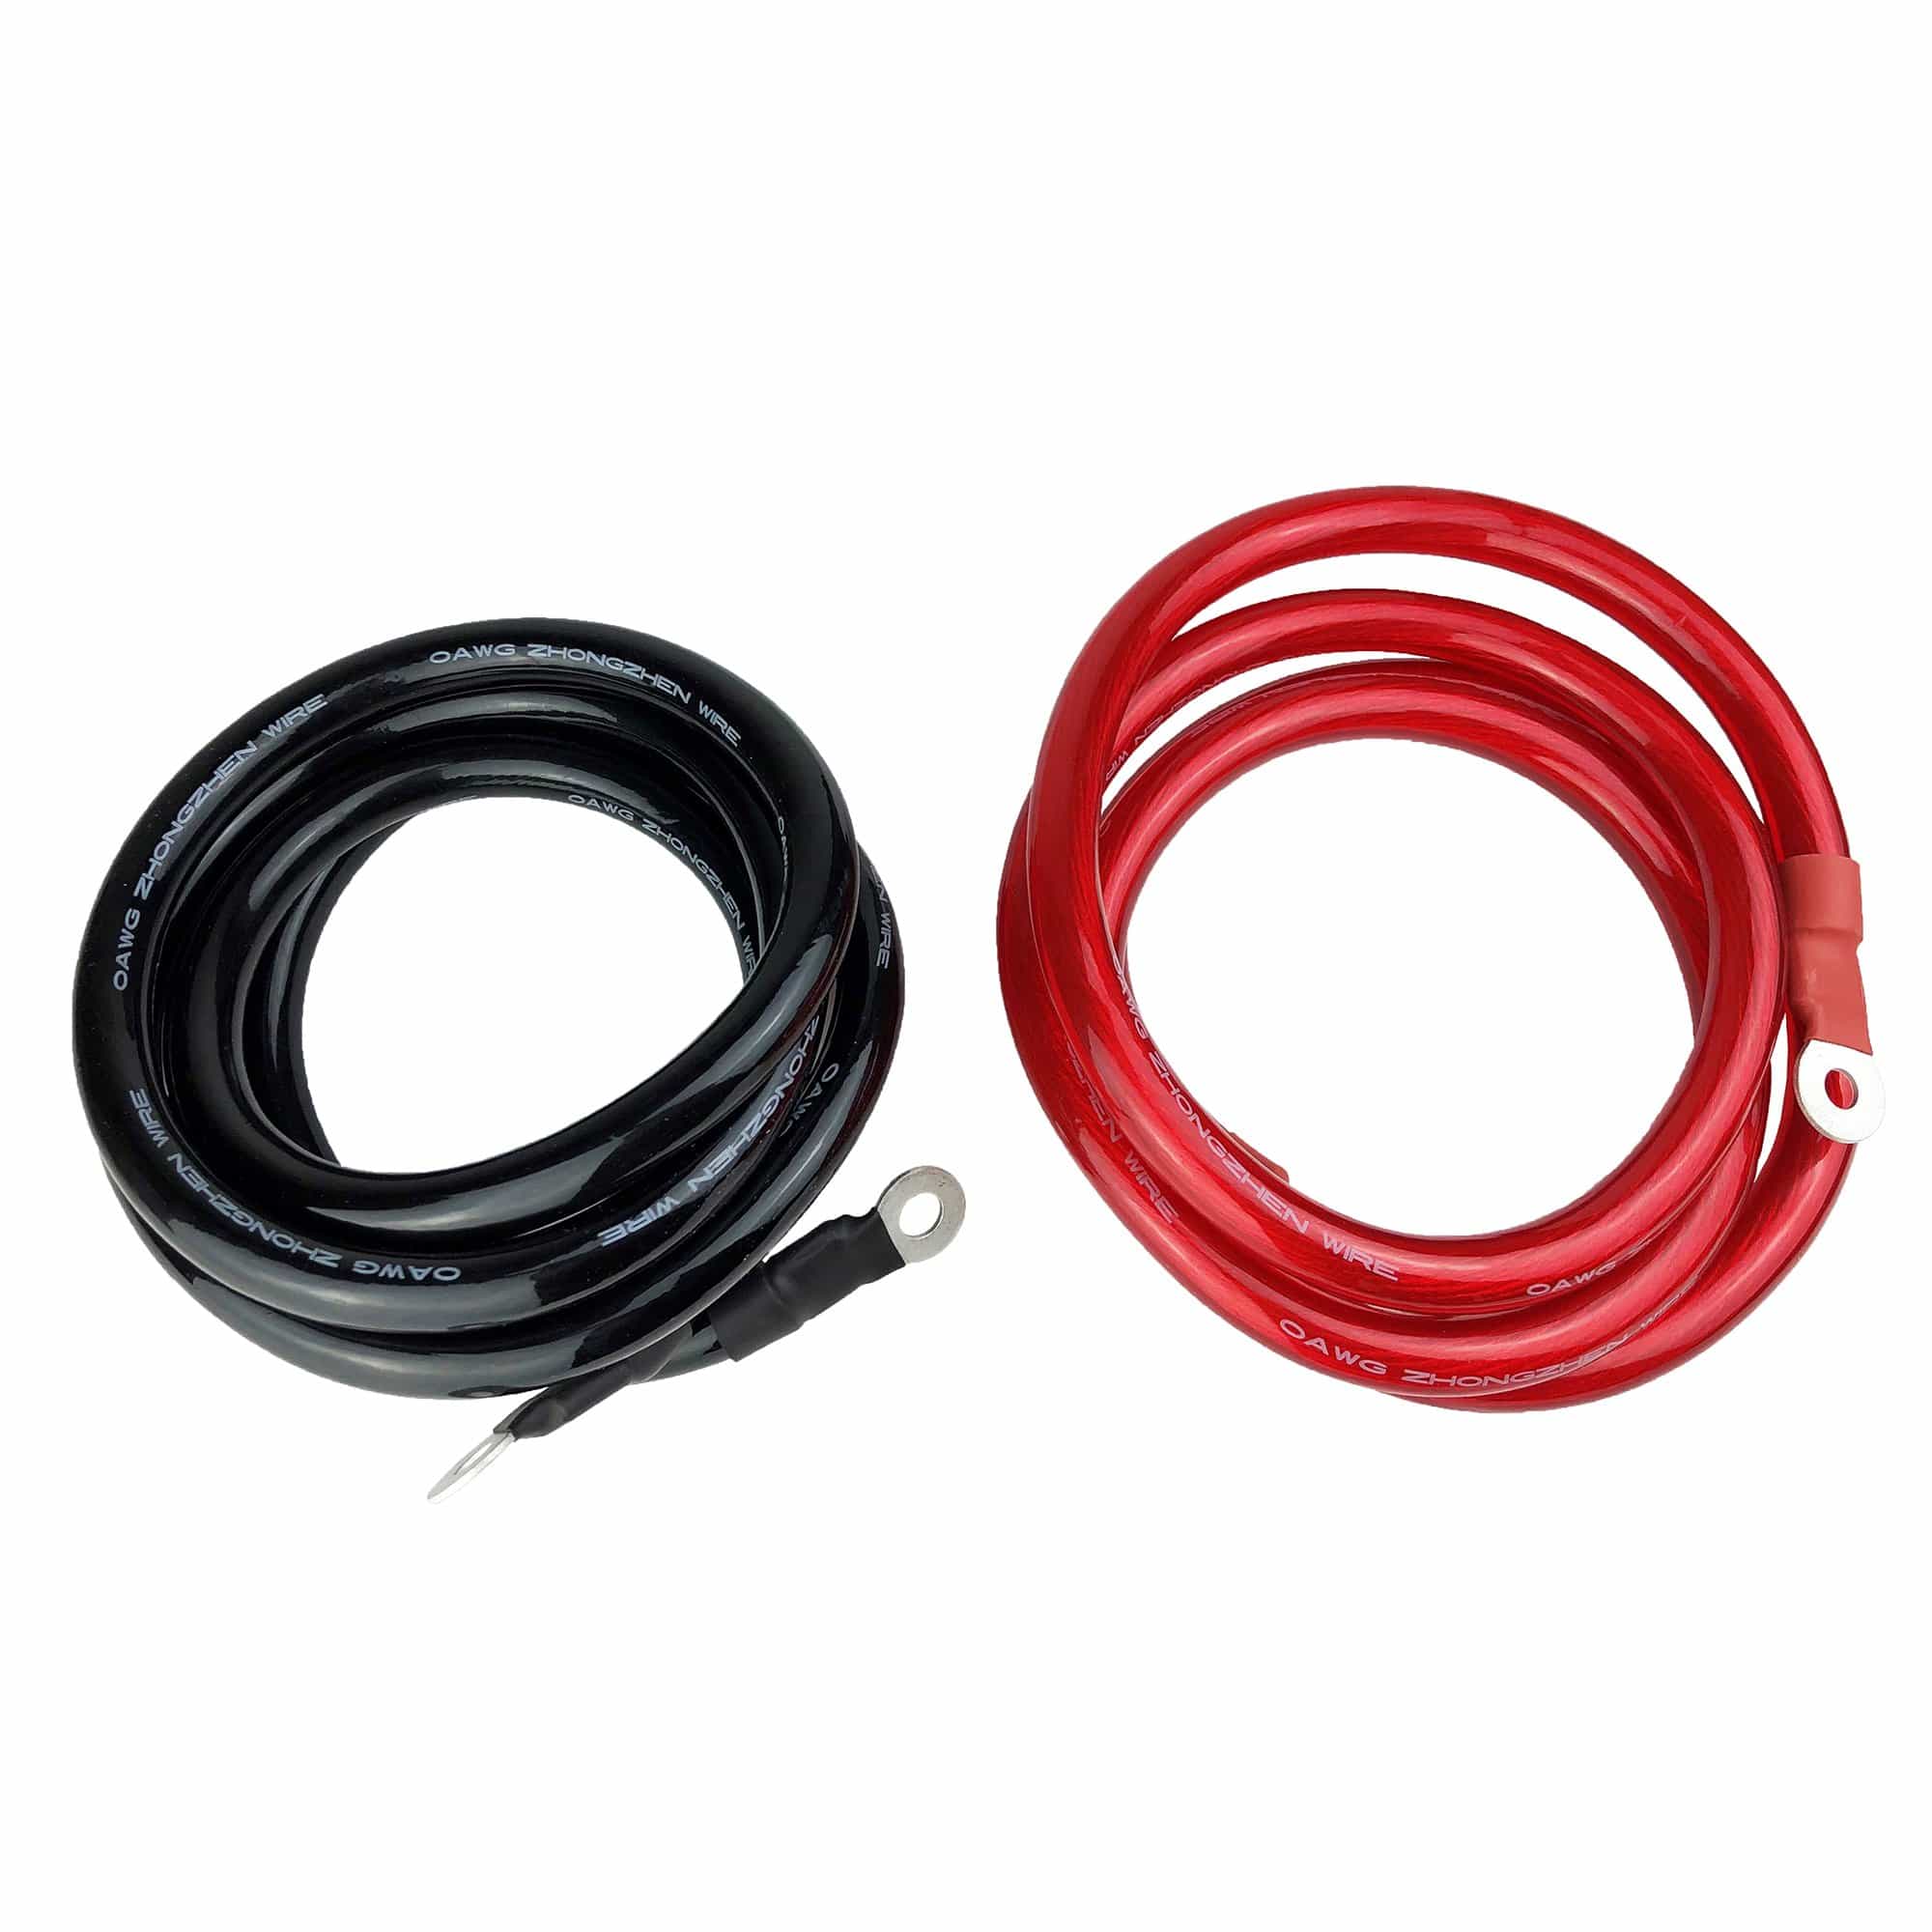 Power Bright 0AWG6 6 Ft 0AWG Lugged Inverter Cable Set